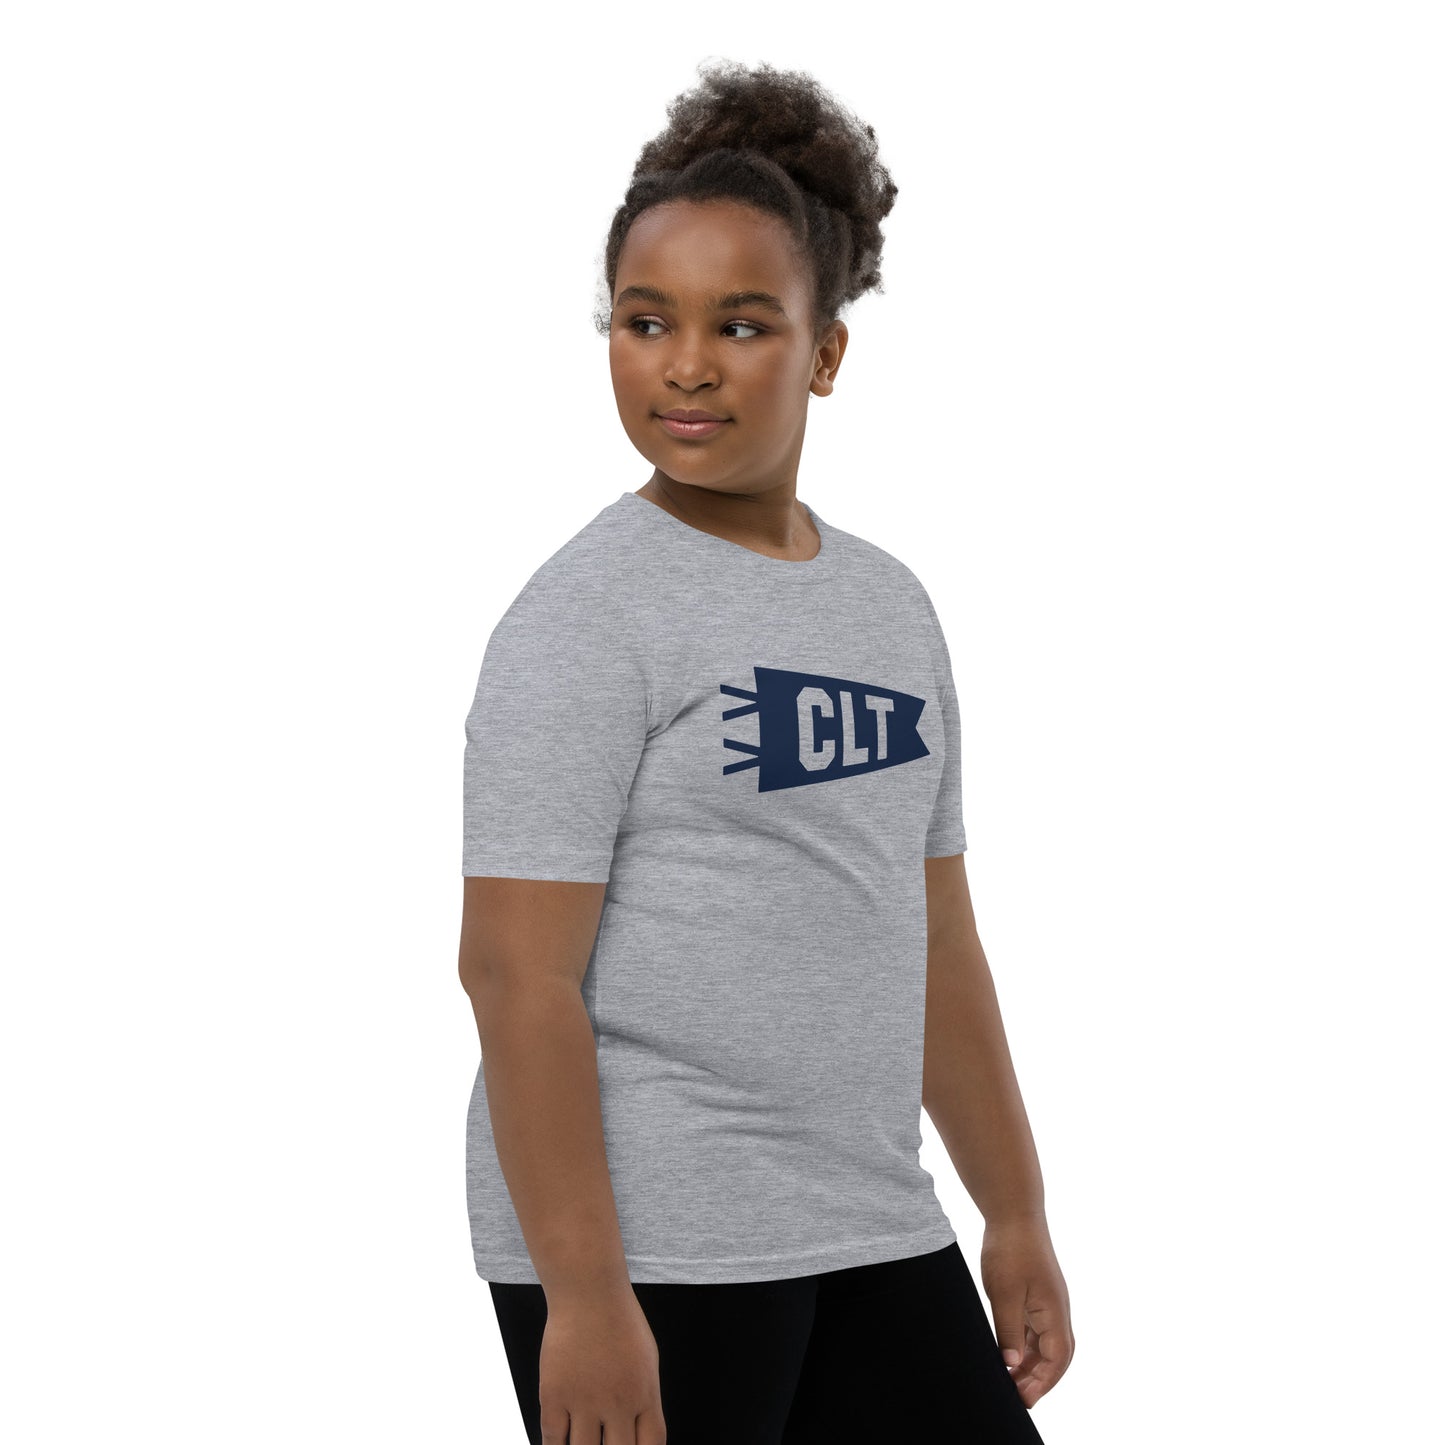 Kid's Airport Code Tee - Navy Blue Graphic • CLT Charlotte • YHM Designs - Image 03